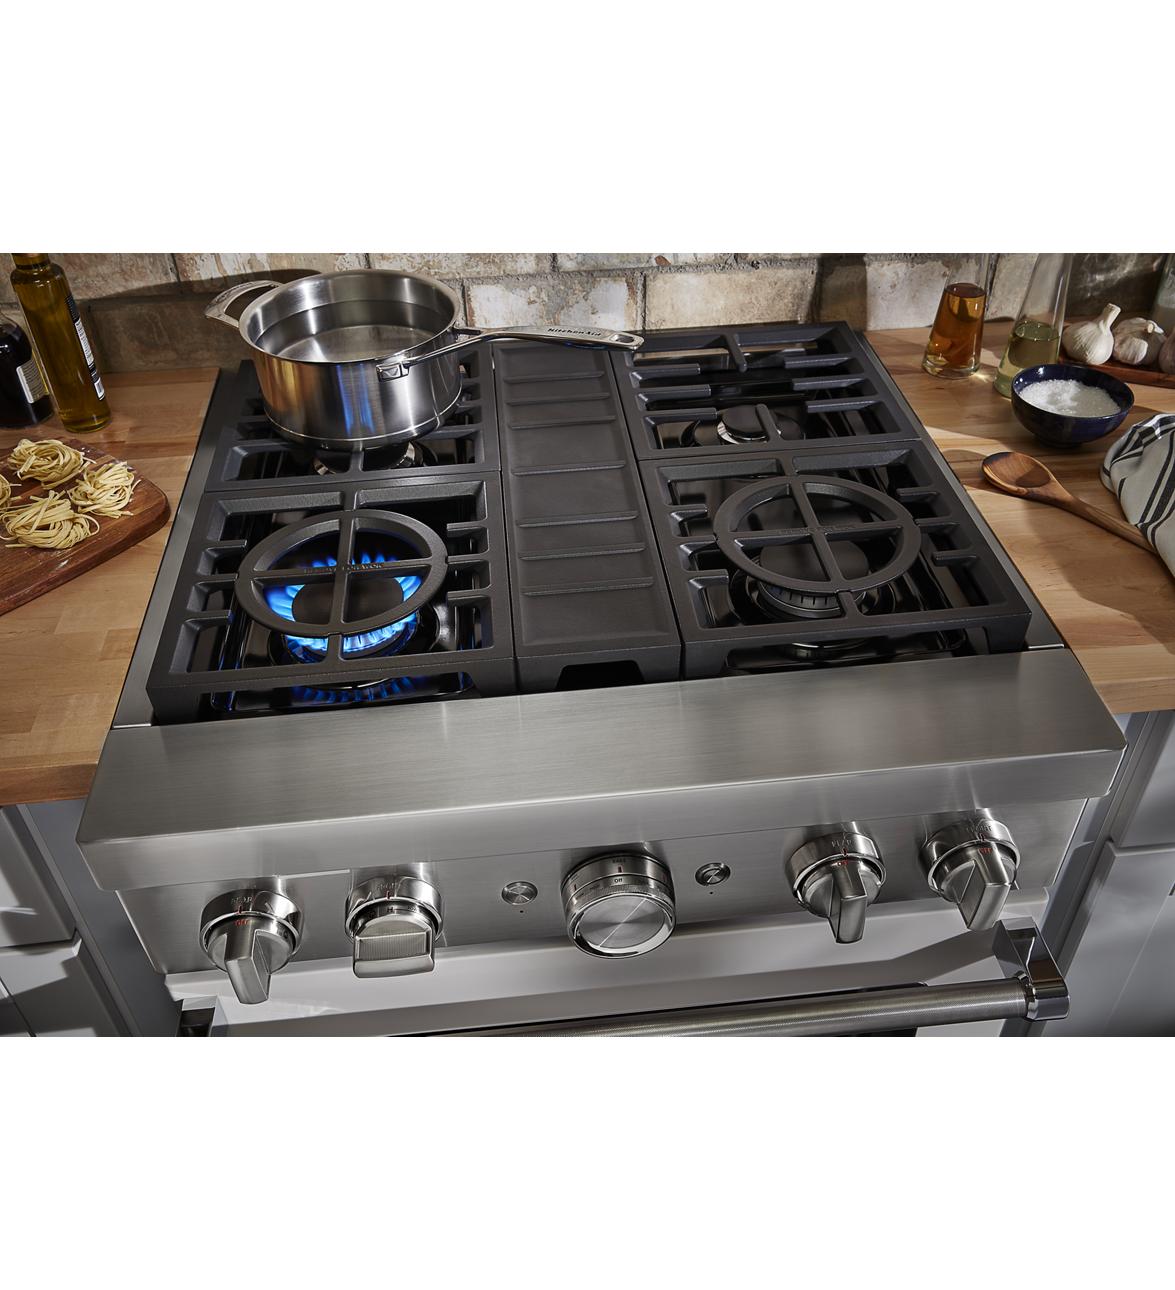 KitchenAid 30 Inch. GAS Cooktop with Dual Ring Burner